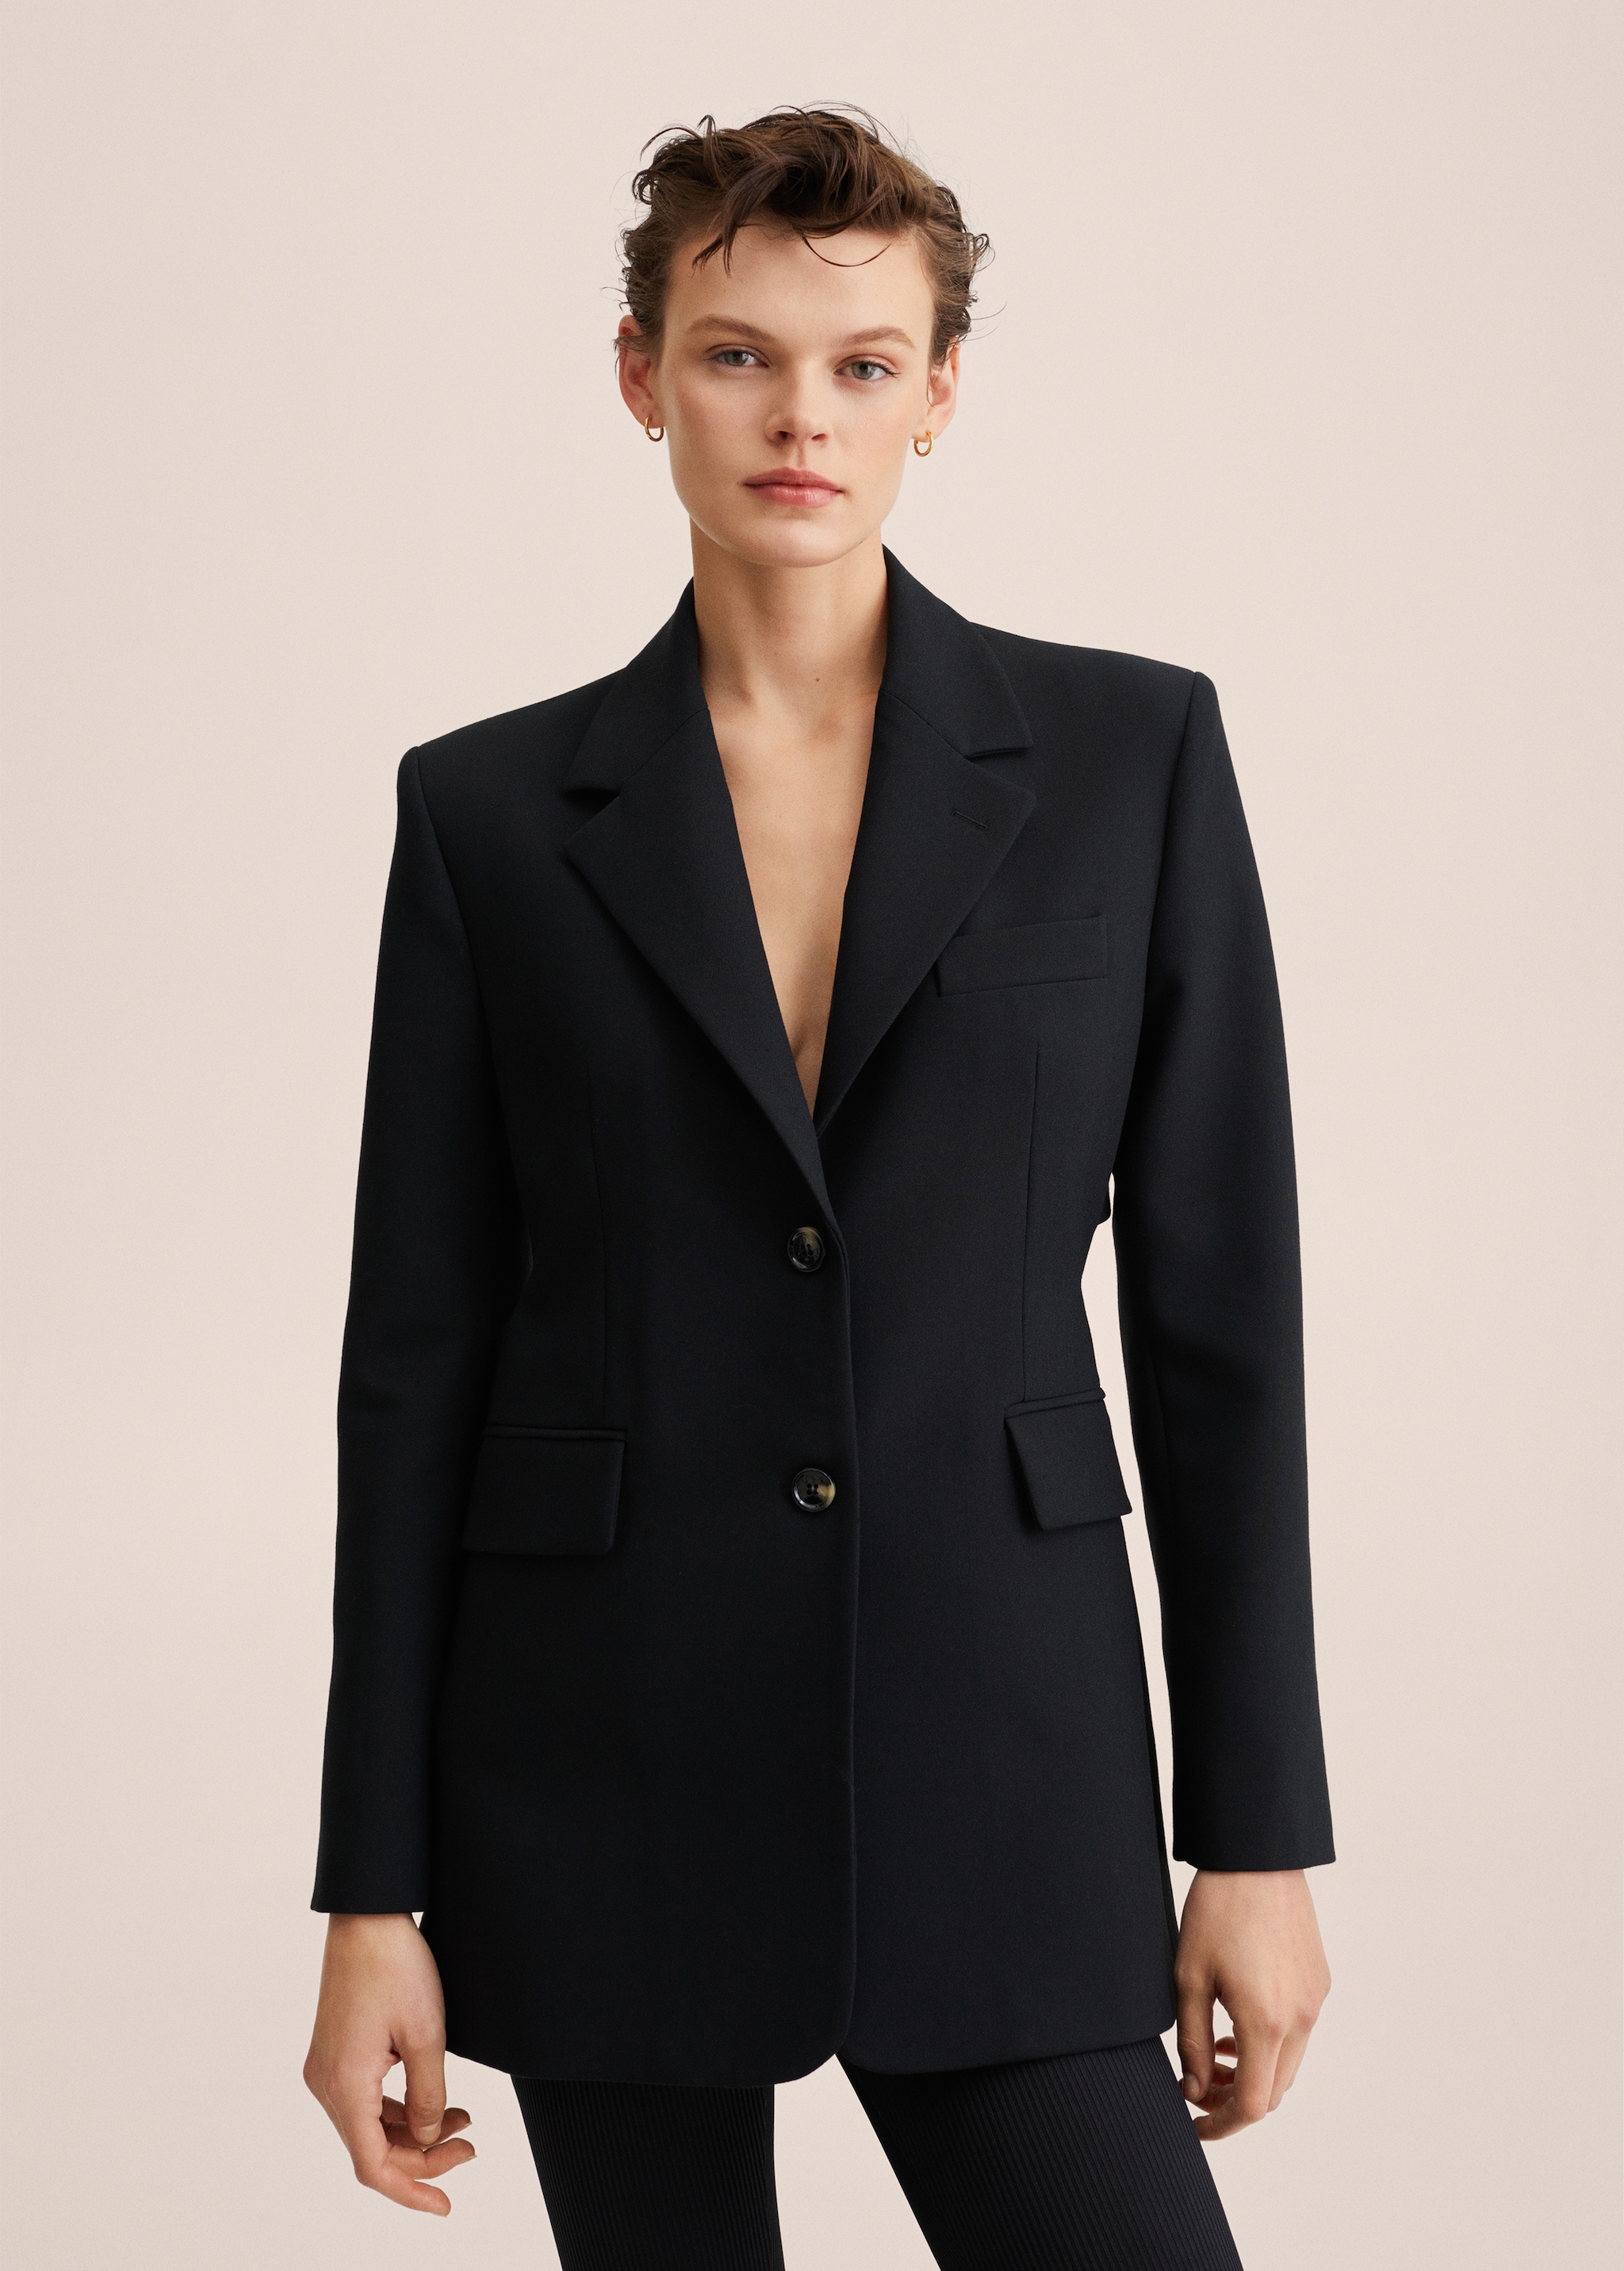 Structured jacket with cut-out - Medium plane